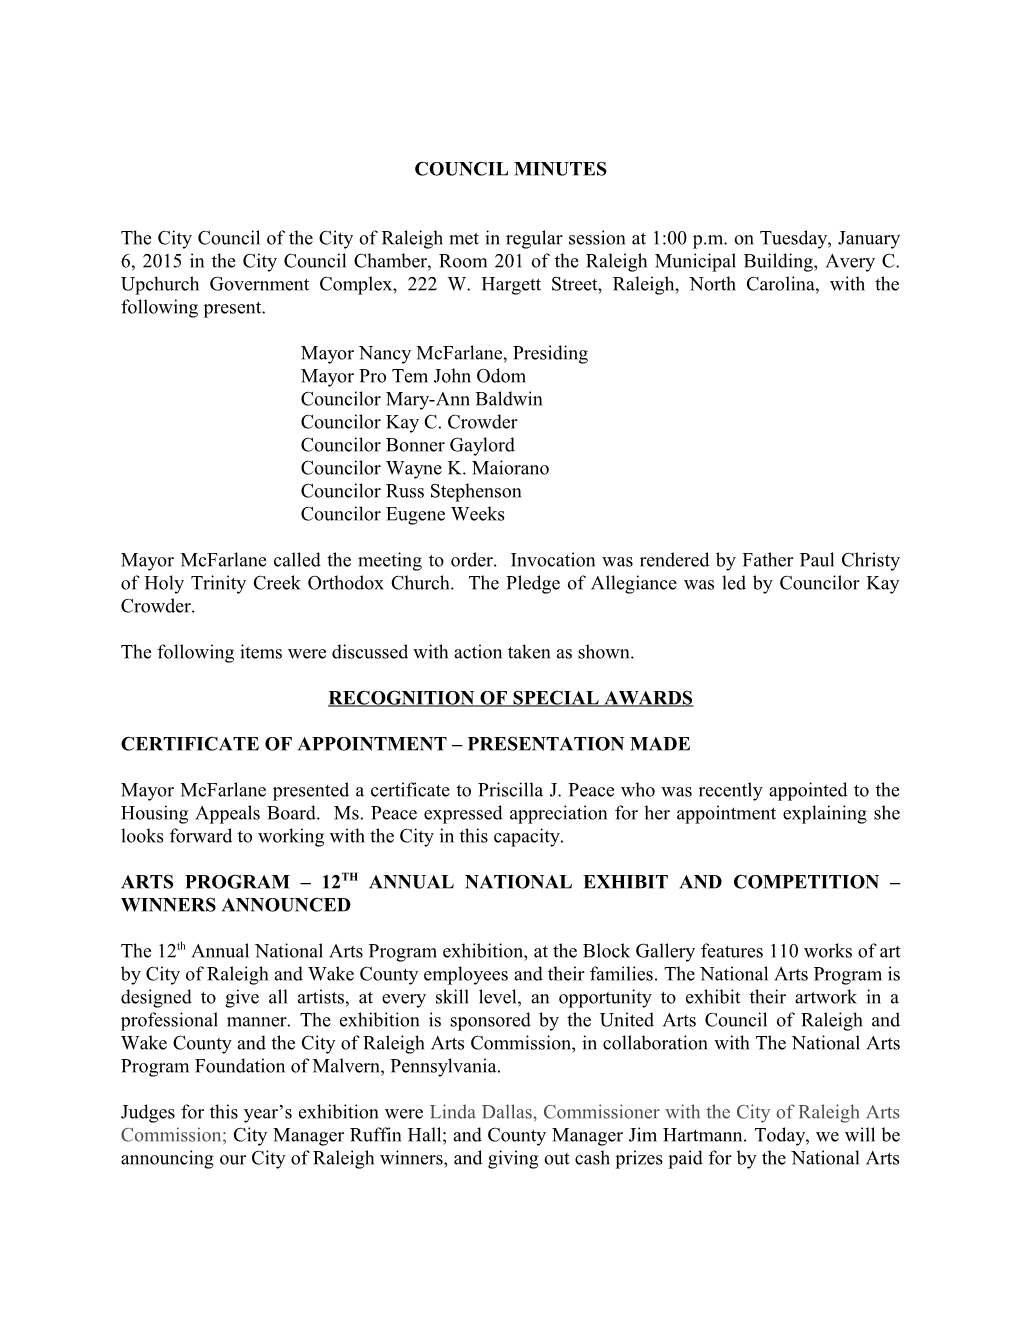 Raleigh City Council Minutes - 01/06/2015